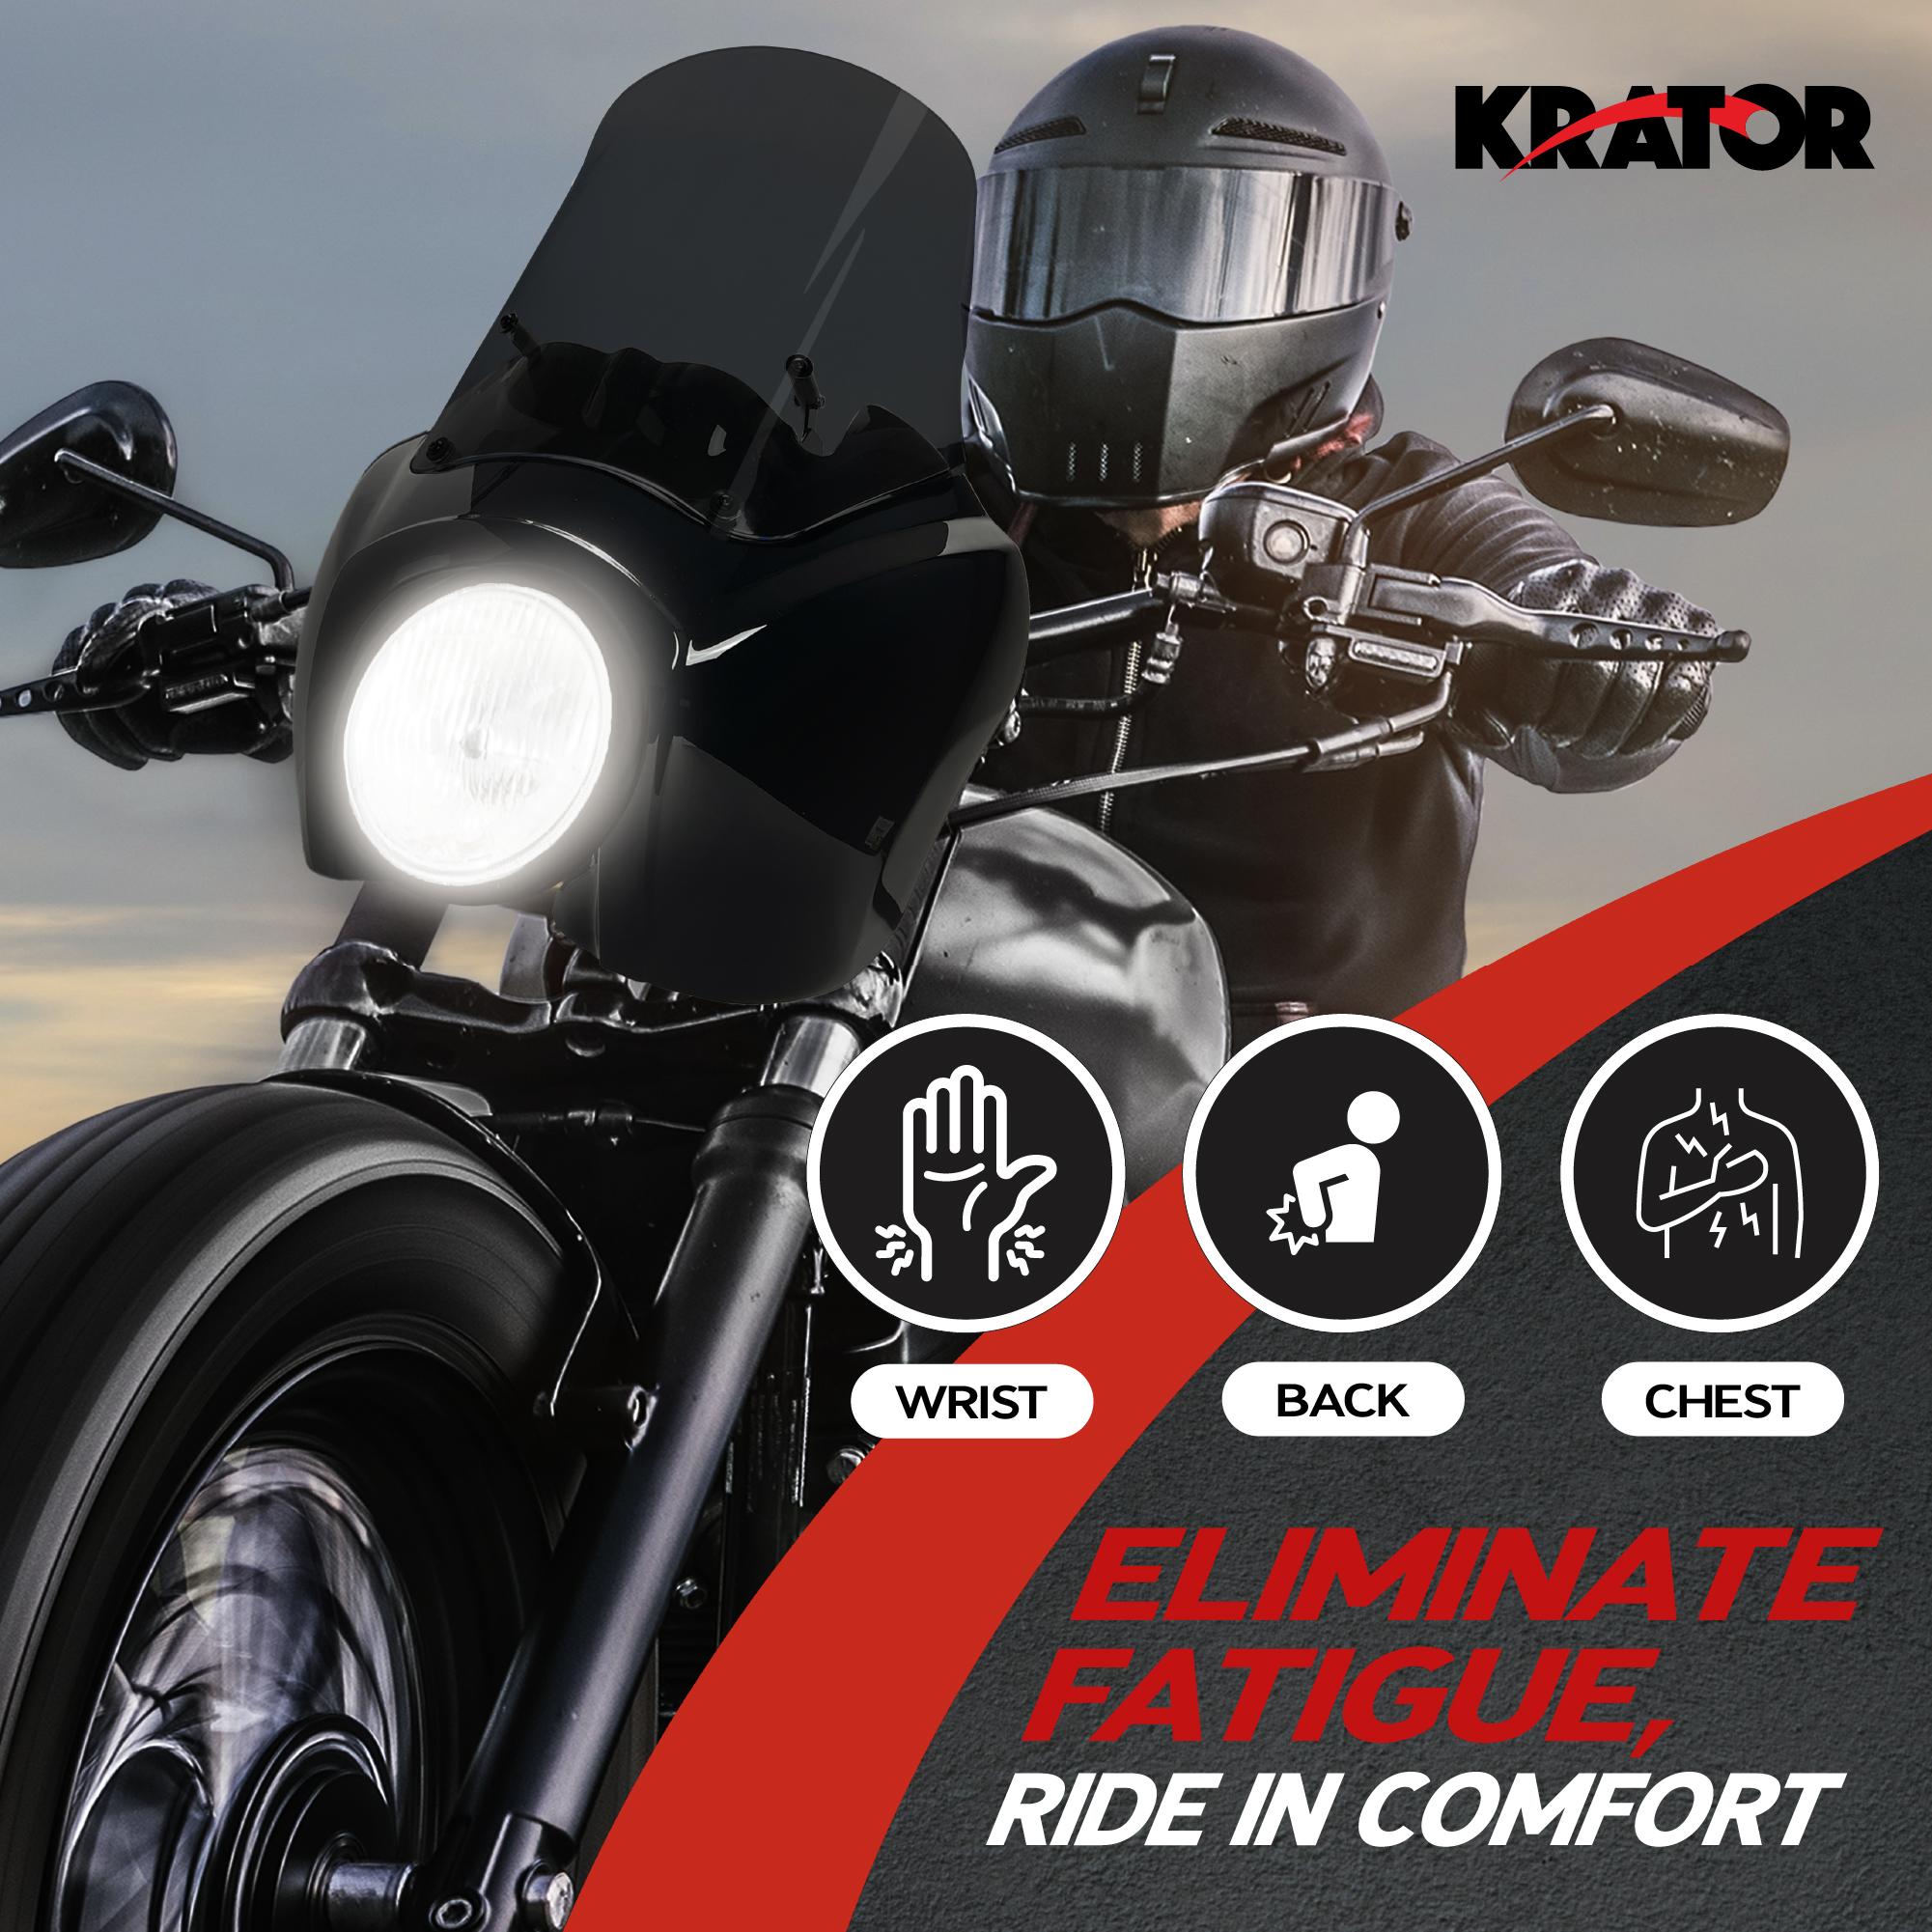 Krator Motorcycle Windshield Fairing, Wind Deflector, Motorcycle Accessories, Smoke Windscreen, Compatible with Harley Davidson Dyna,